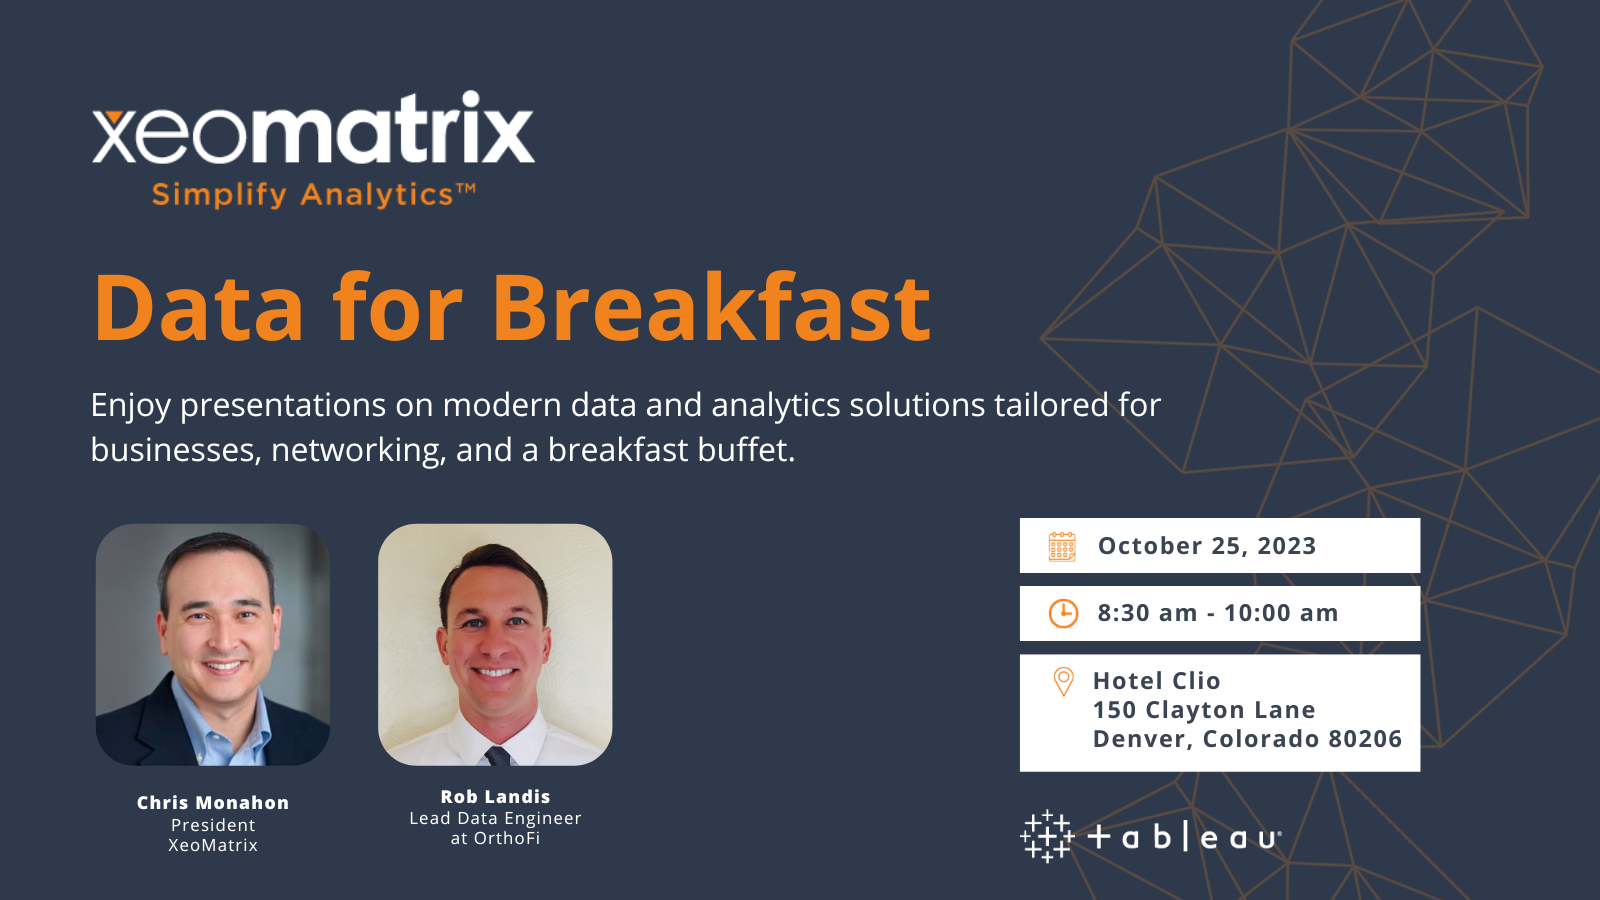 XeoMatrix Data for Breakfast. Enjoy presentations on modern data and analytics solutions tailored for businesses, networking, and a breakfast buffet. October 25, 2023. 8:30-10:00 AM. Hotel Clio, 150 Clayton Lane, Denver, Colorado 80206.